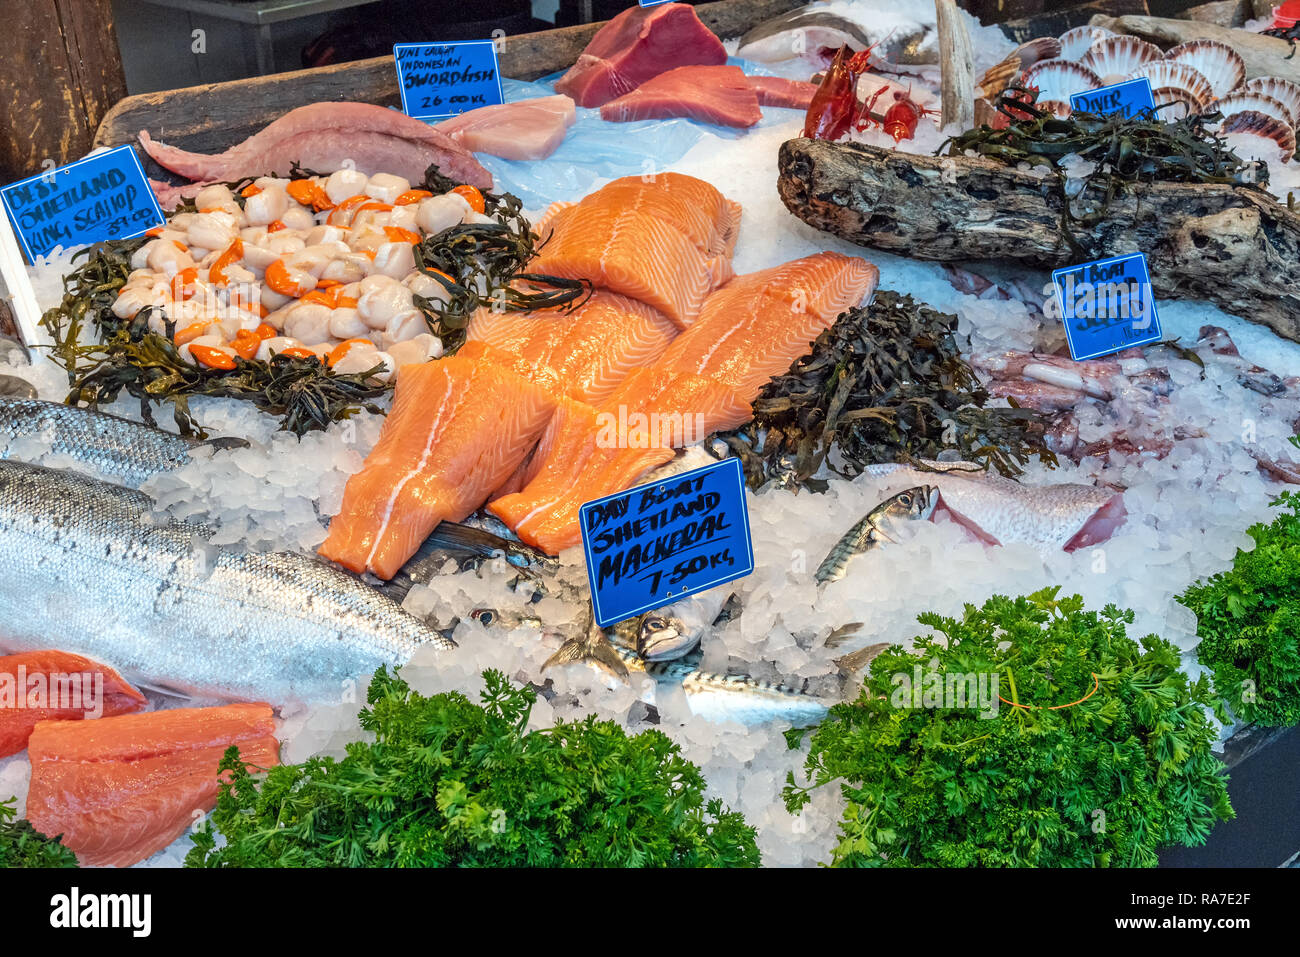 Salmon fillet and other fish and seafood for sale at a market in London, UK Stock Photo